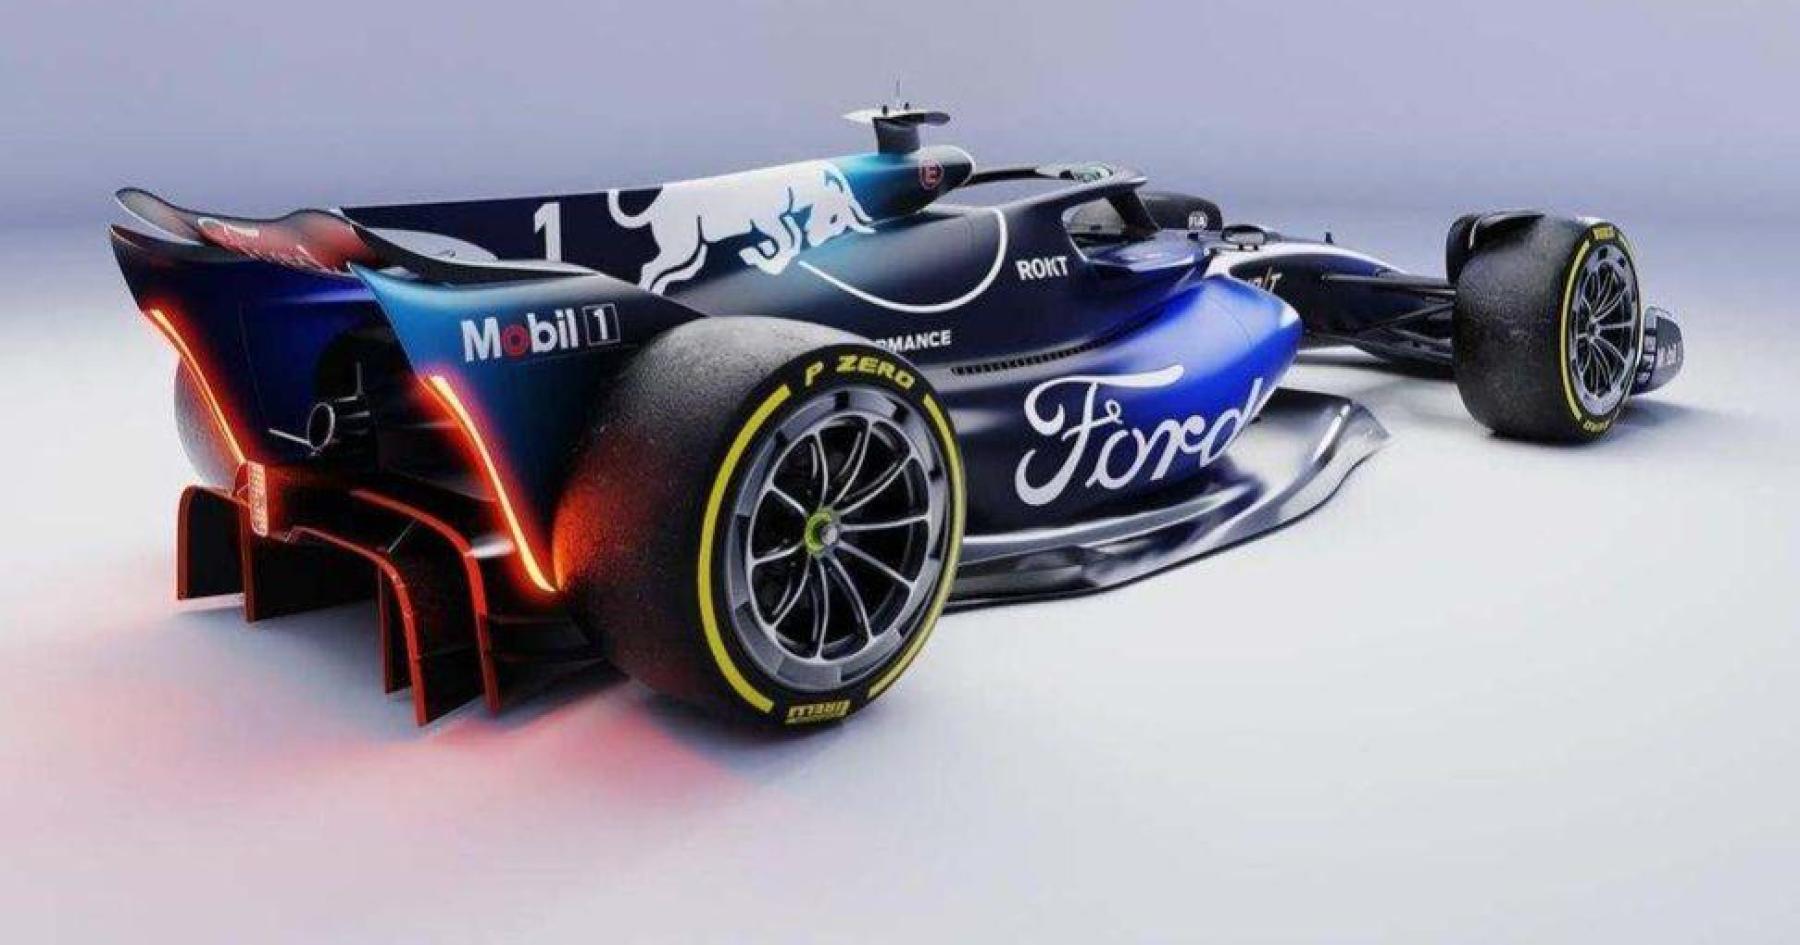 Revving up the Excitement: A Sneak Peek into the Futuristic Red Bull-Ford Formula 1 Liveries